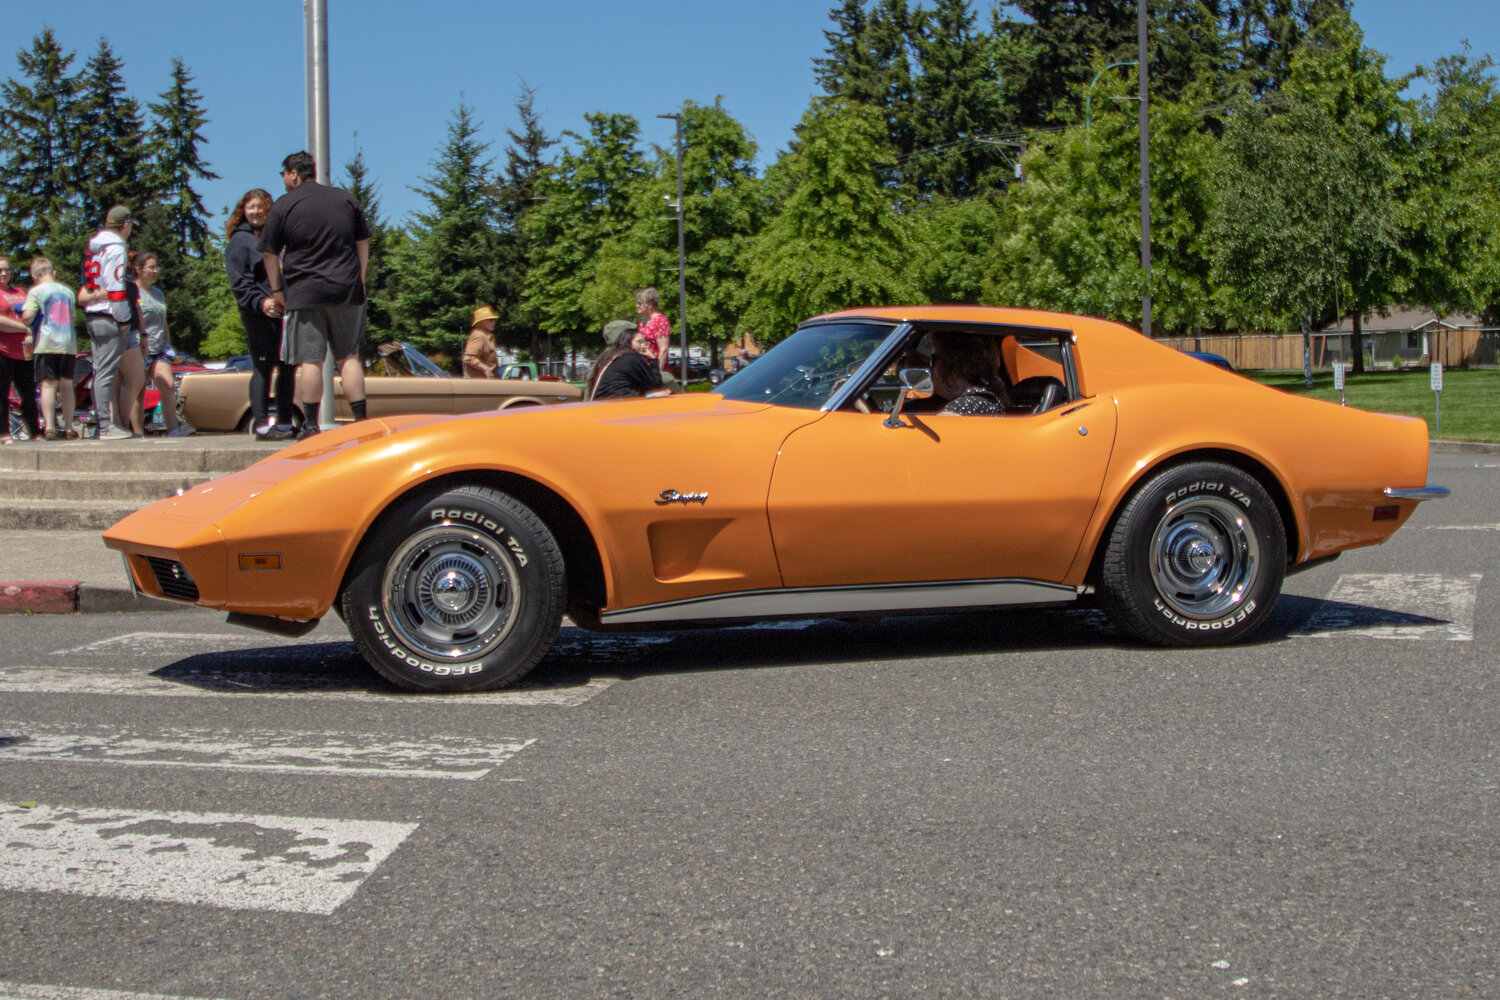 Jim and Lori Champion leave the Yelm High School car show in their 1973 Chevrolet Corvette Stingray on Sunday, June 4.